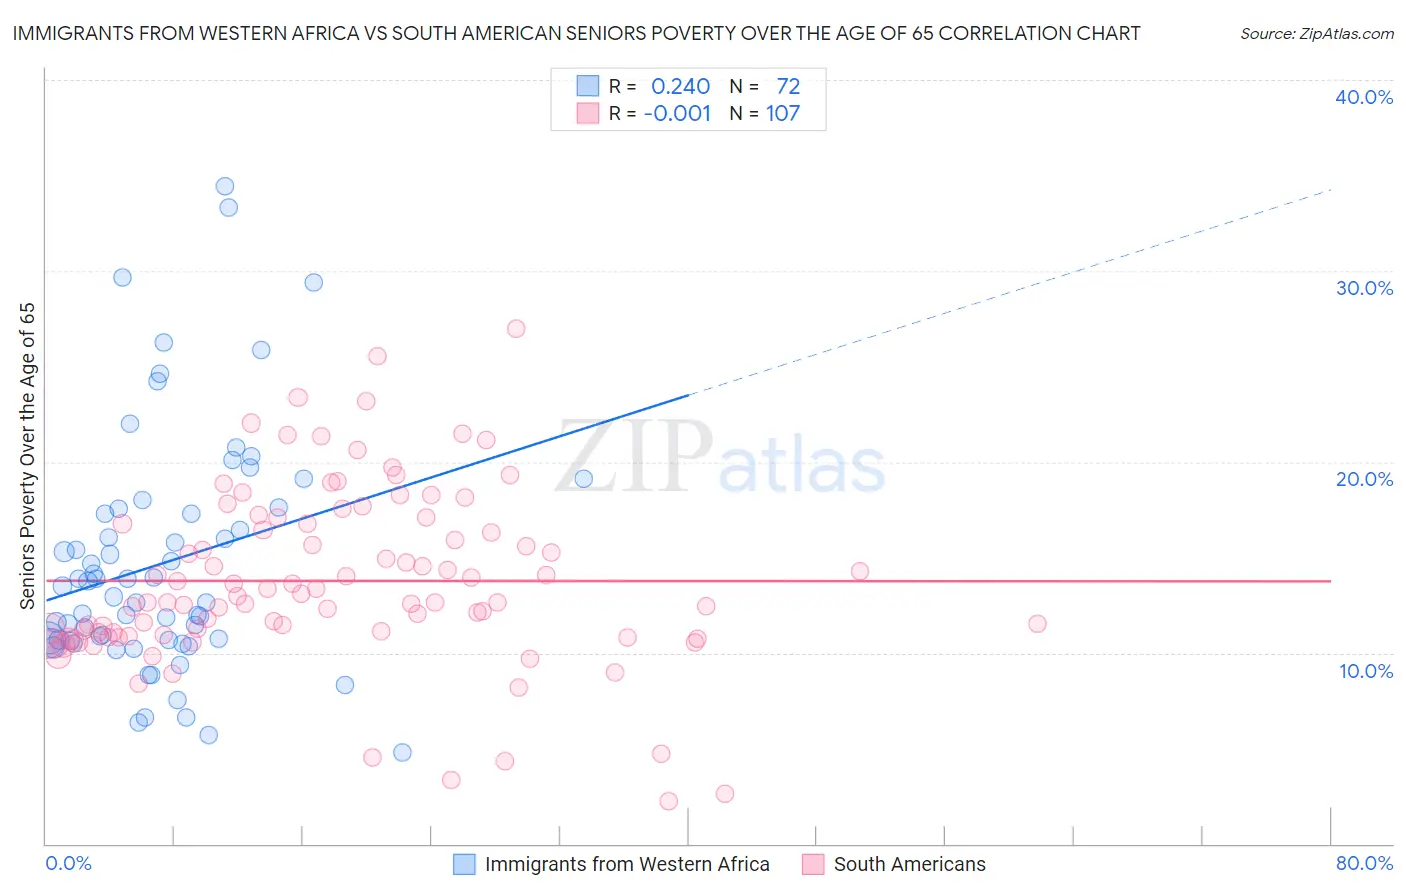 Immigrants from Western Africa vs South American Seniors Poverty Over the Age of 65